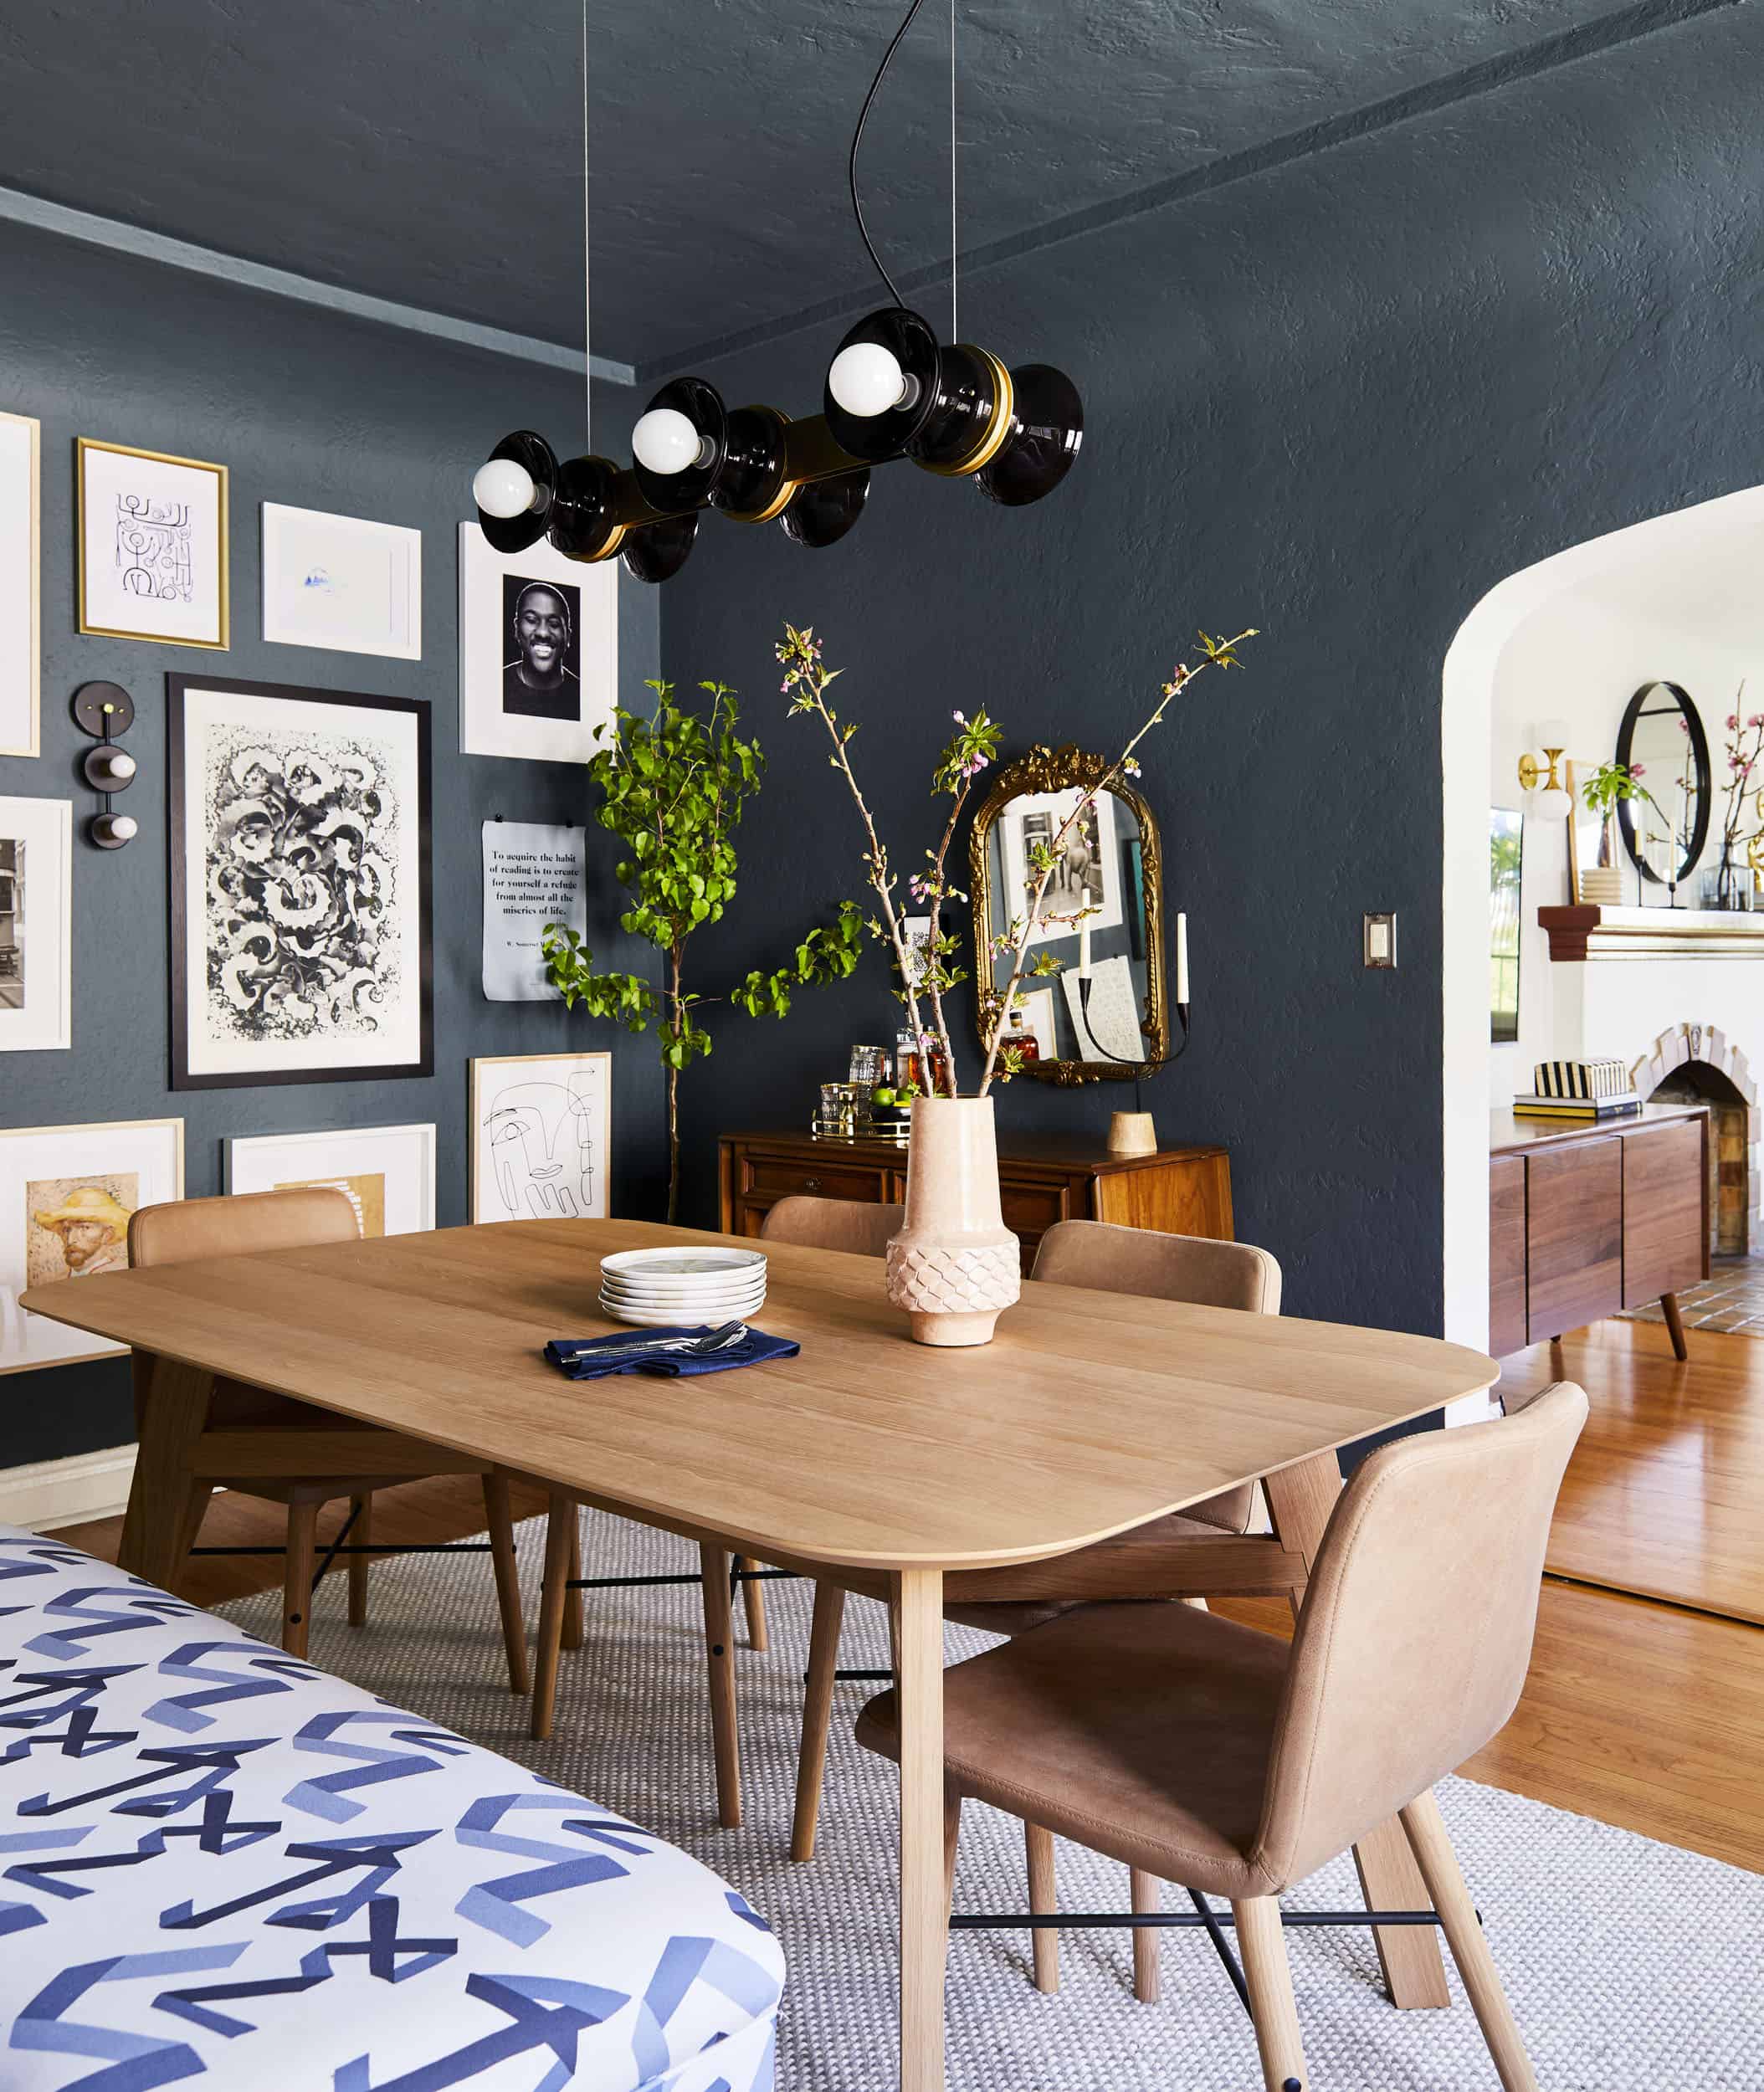 Best dark blue green paint colors: Inchyra Blue by Farrow & Ball in a dining room with curved walls and gallery wall.